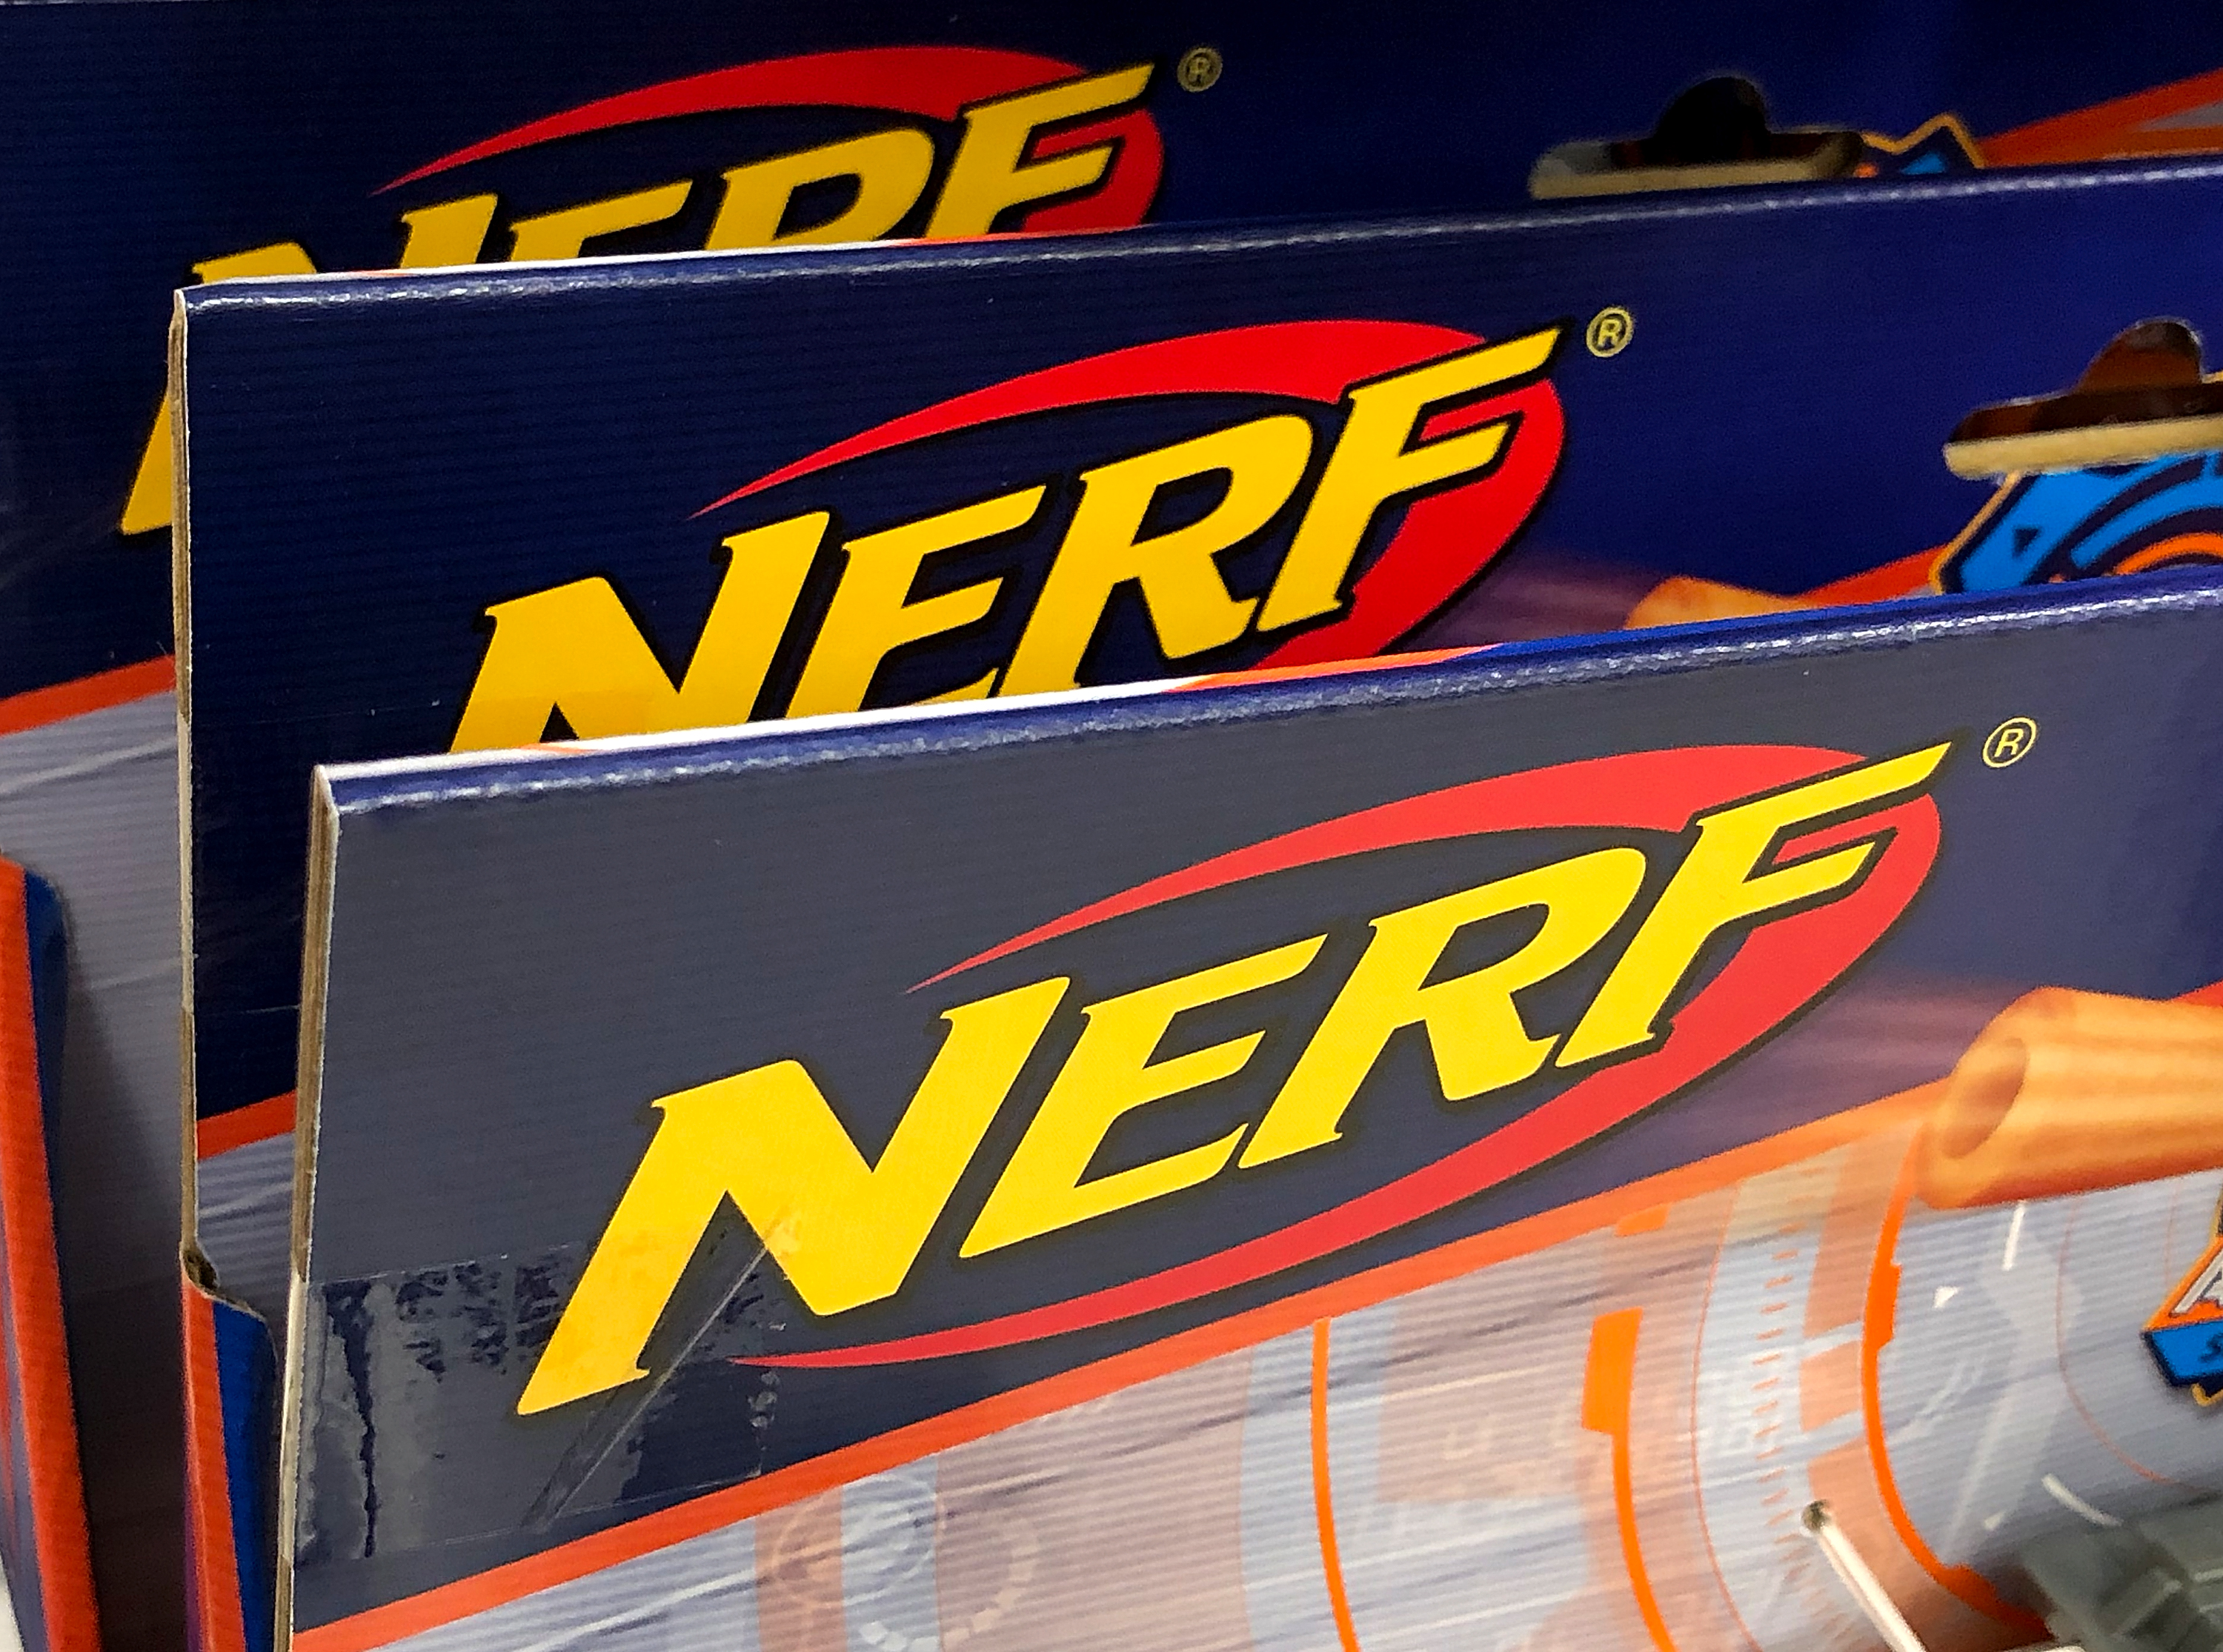 Hasbro Has a New Nerf Gun That Annoyingly Will Only Shoot Fancy Expensive Foam Darts